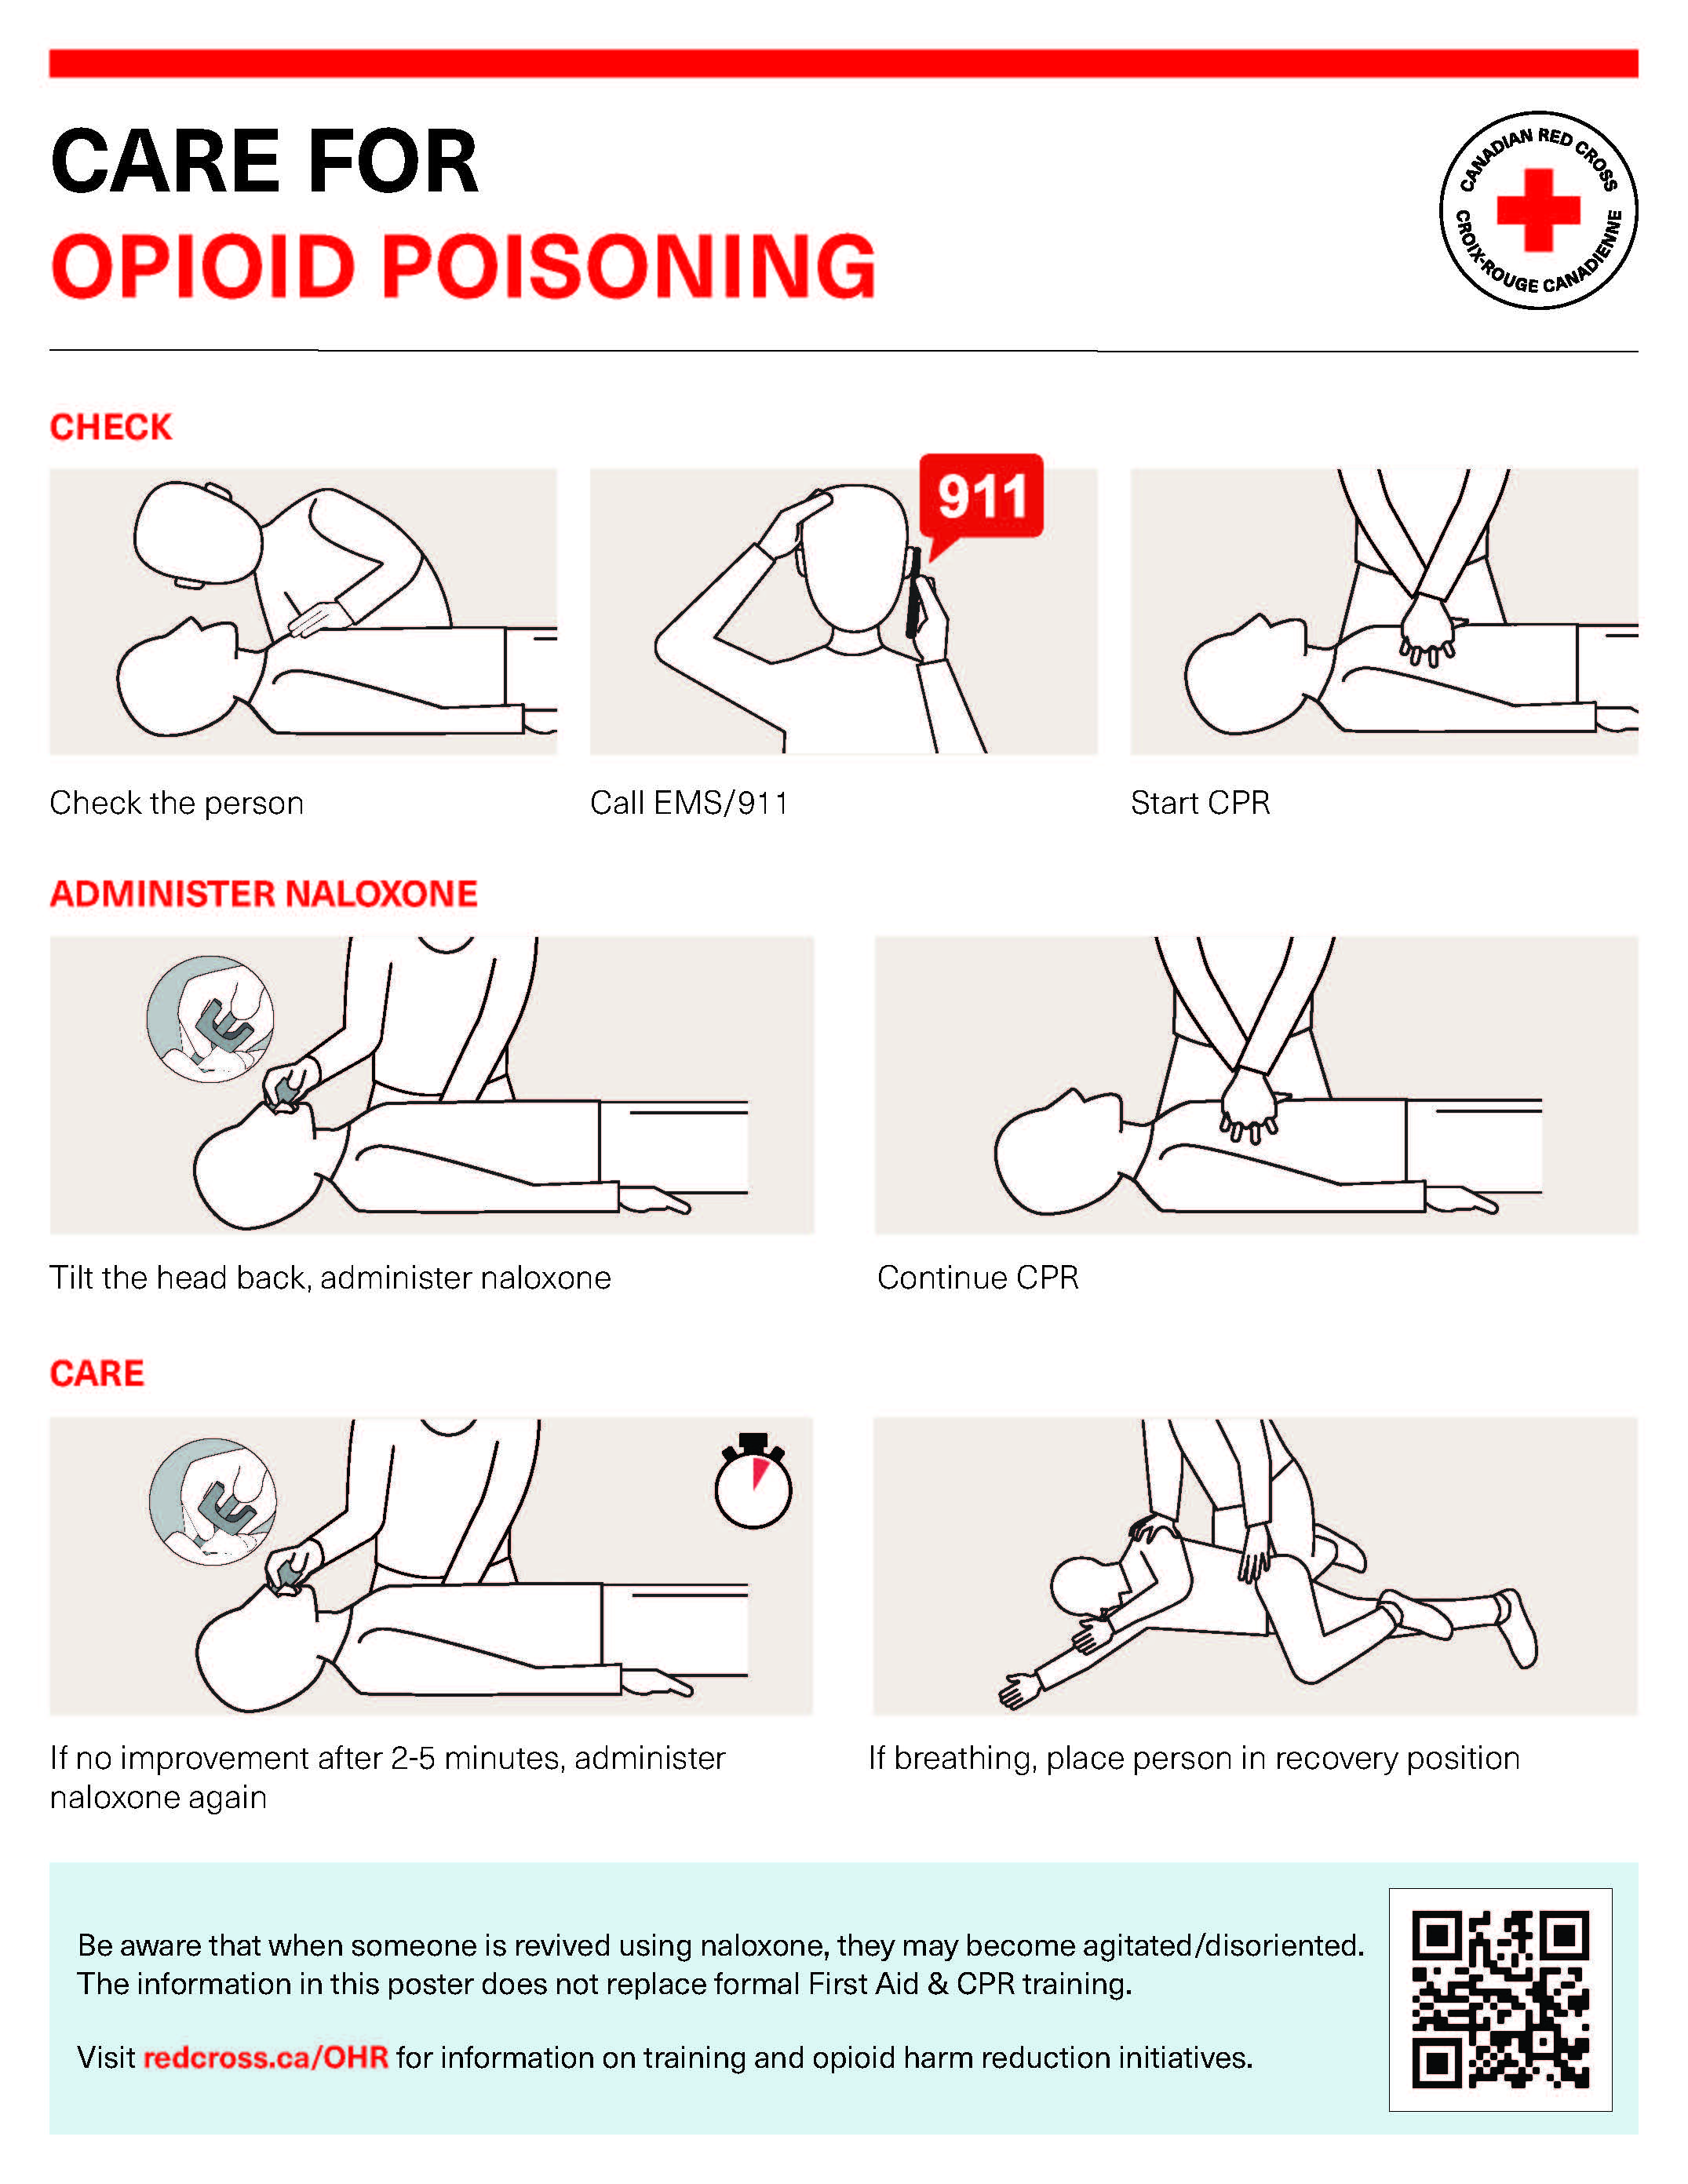 Poster of Care For Opioid Poisoning by the Canadian Red Cross. Check: check the person, call EMS/911, and start CPR. Administer naloxone: till the head back, administer naloxone, and continue CPR. Care: if there is no improvement after 2 to 5 minutes, administer naloxone again. If breathing, place the person in the recovery position. Be aware that when someone is revived using naloxone, they may become agitated/disoriented. The information in this poster does not replace formal First Aid and CPR training. Visit redcross.ca/OHR for information on training and opioid harm reduction initiatives.